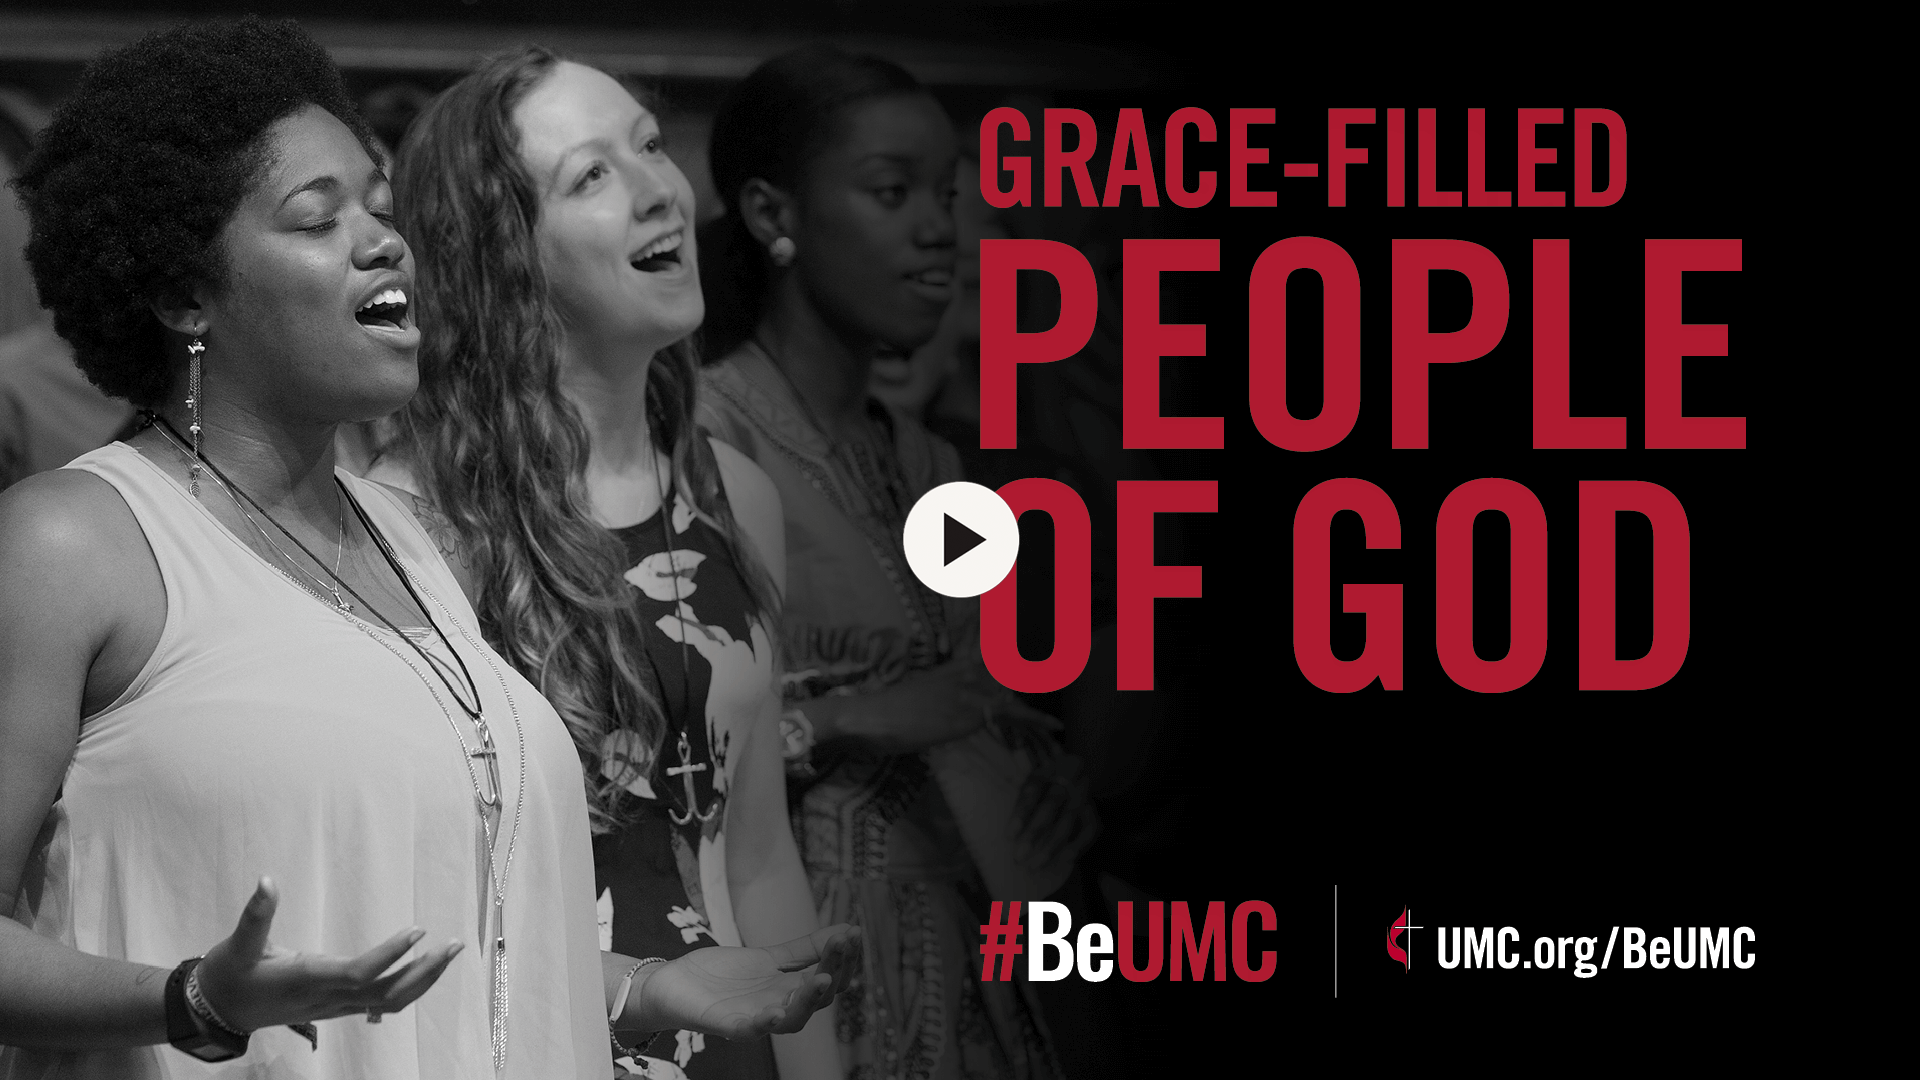 The #BeUMC campaign reminds us of who we are at our best. As people of God called The United Methodist Church, we’re faithful followers of Jesus seeking to make the world a better place. Grace-filled (praise), video.